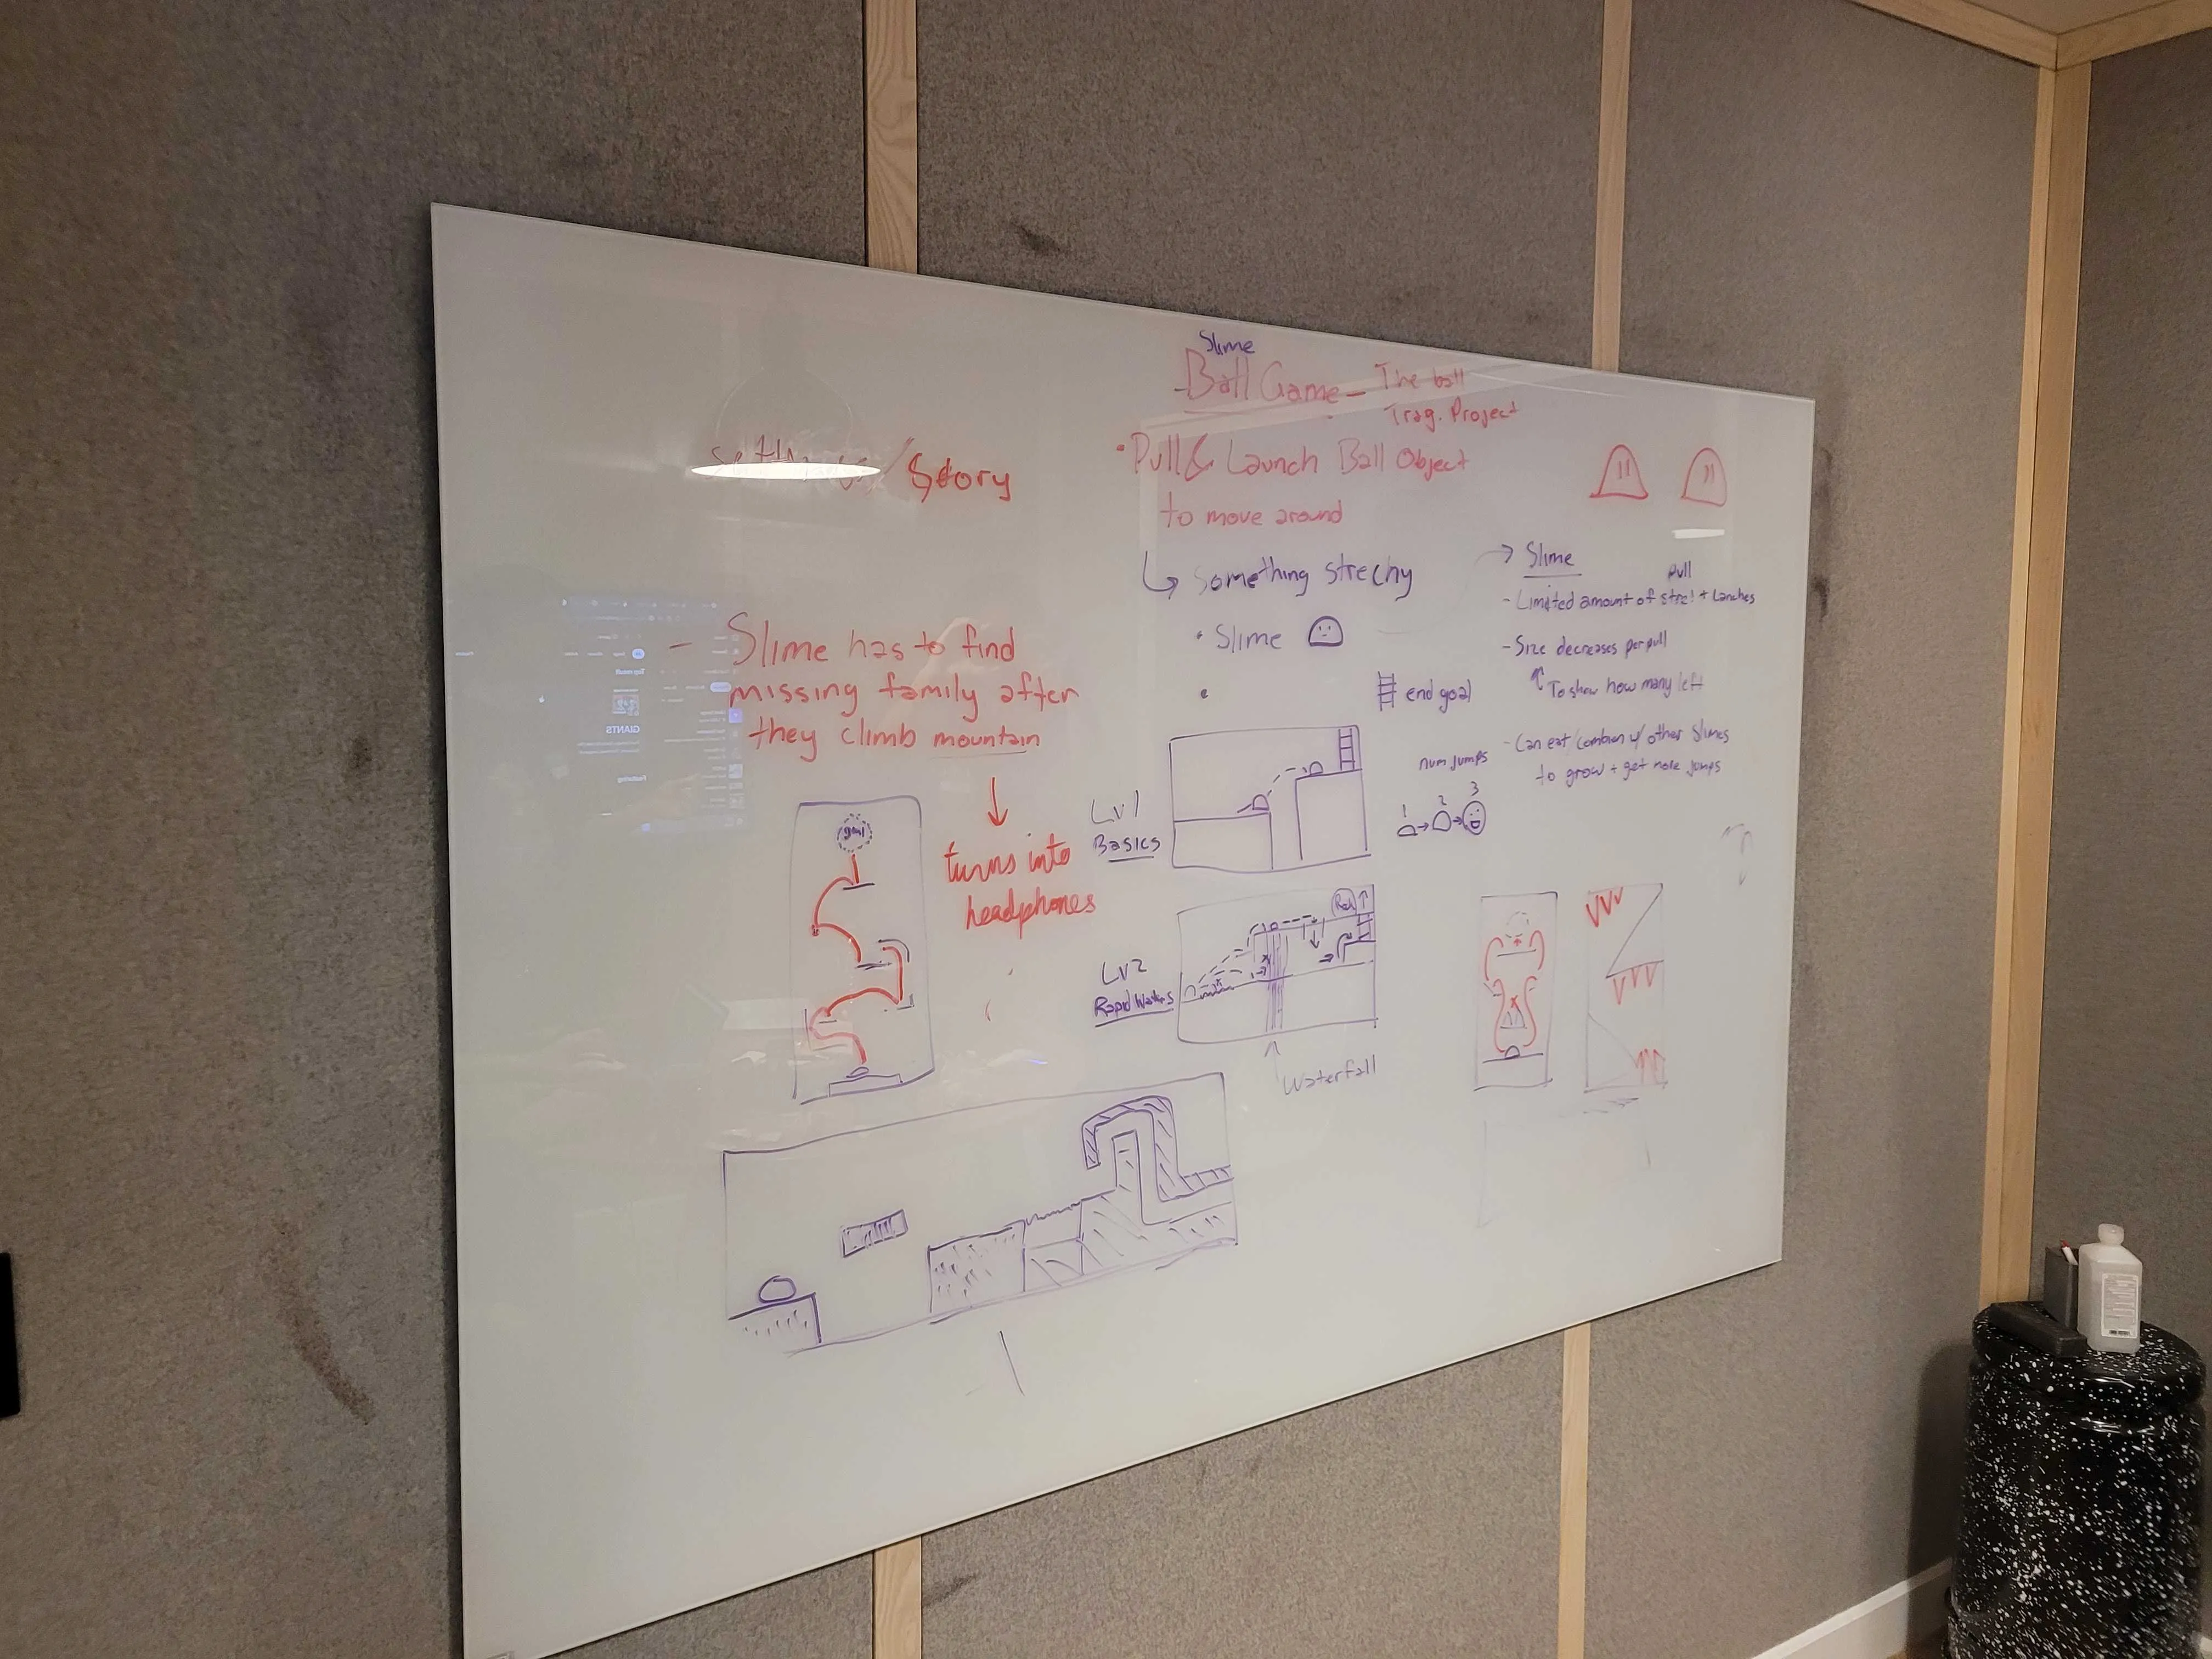 A whiteboard showing brainstorming and planning for a game.